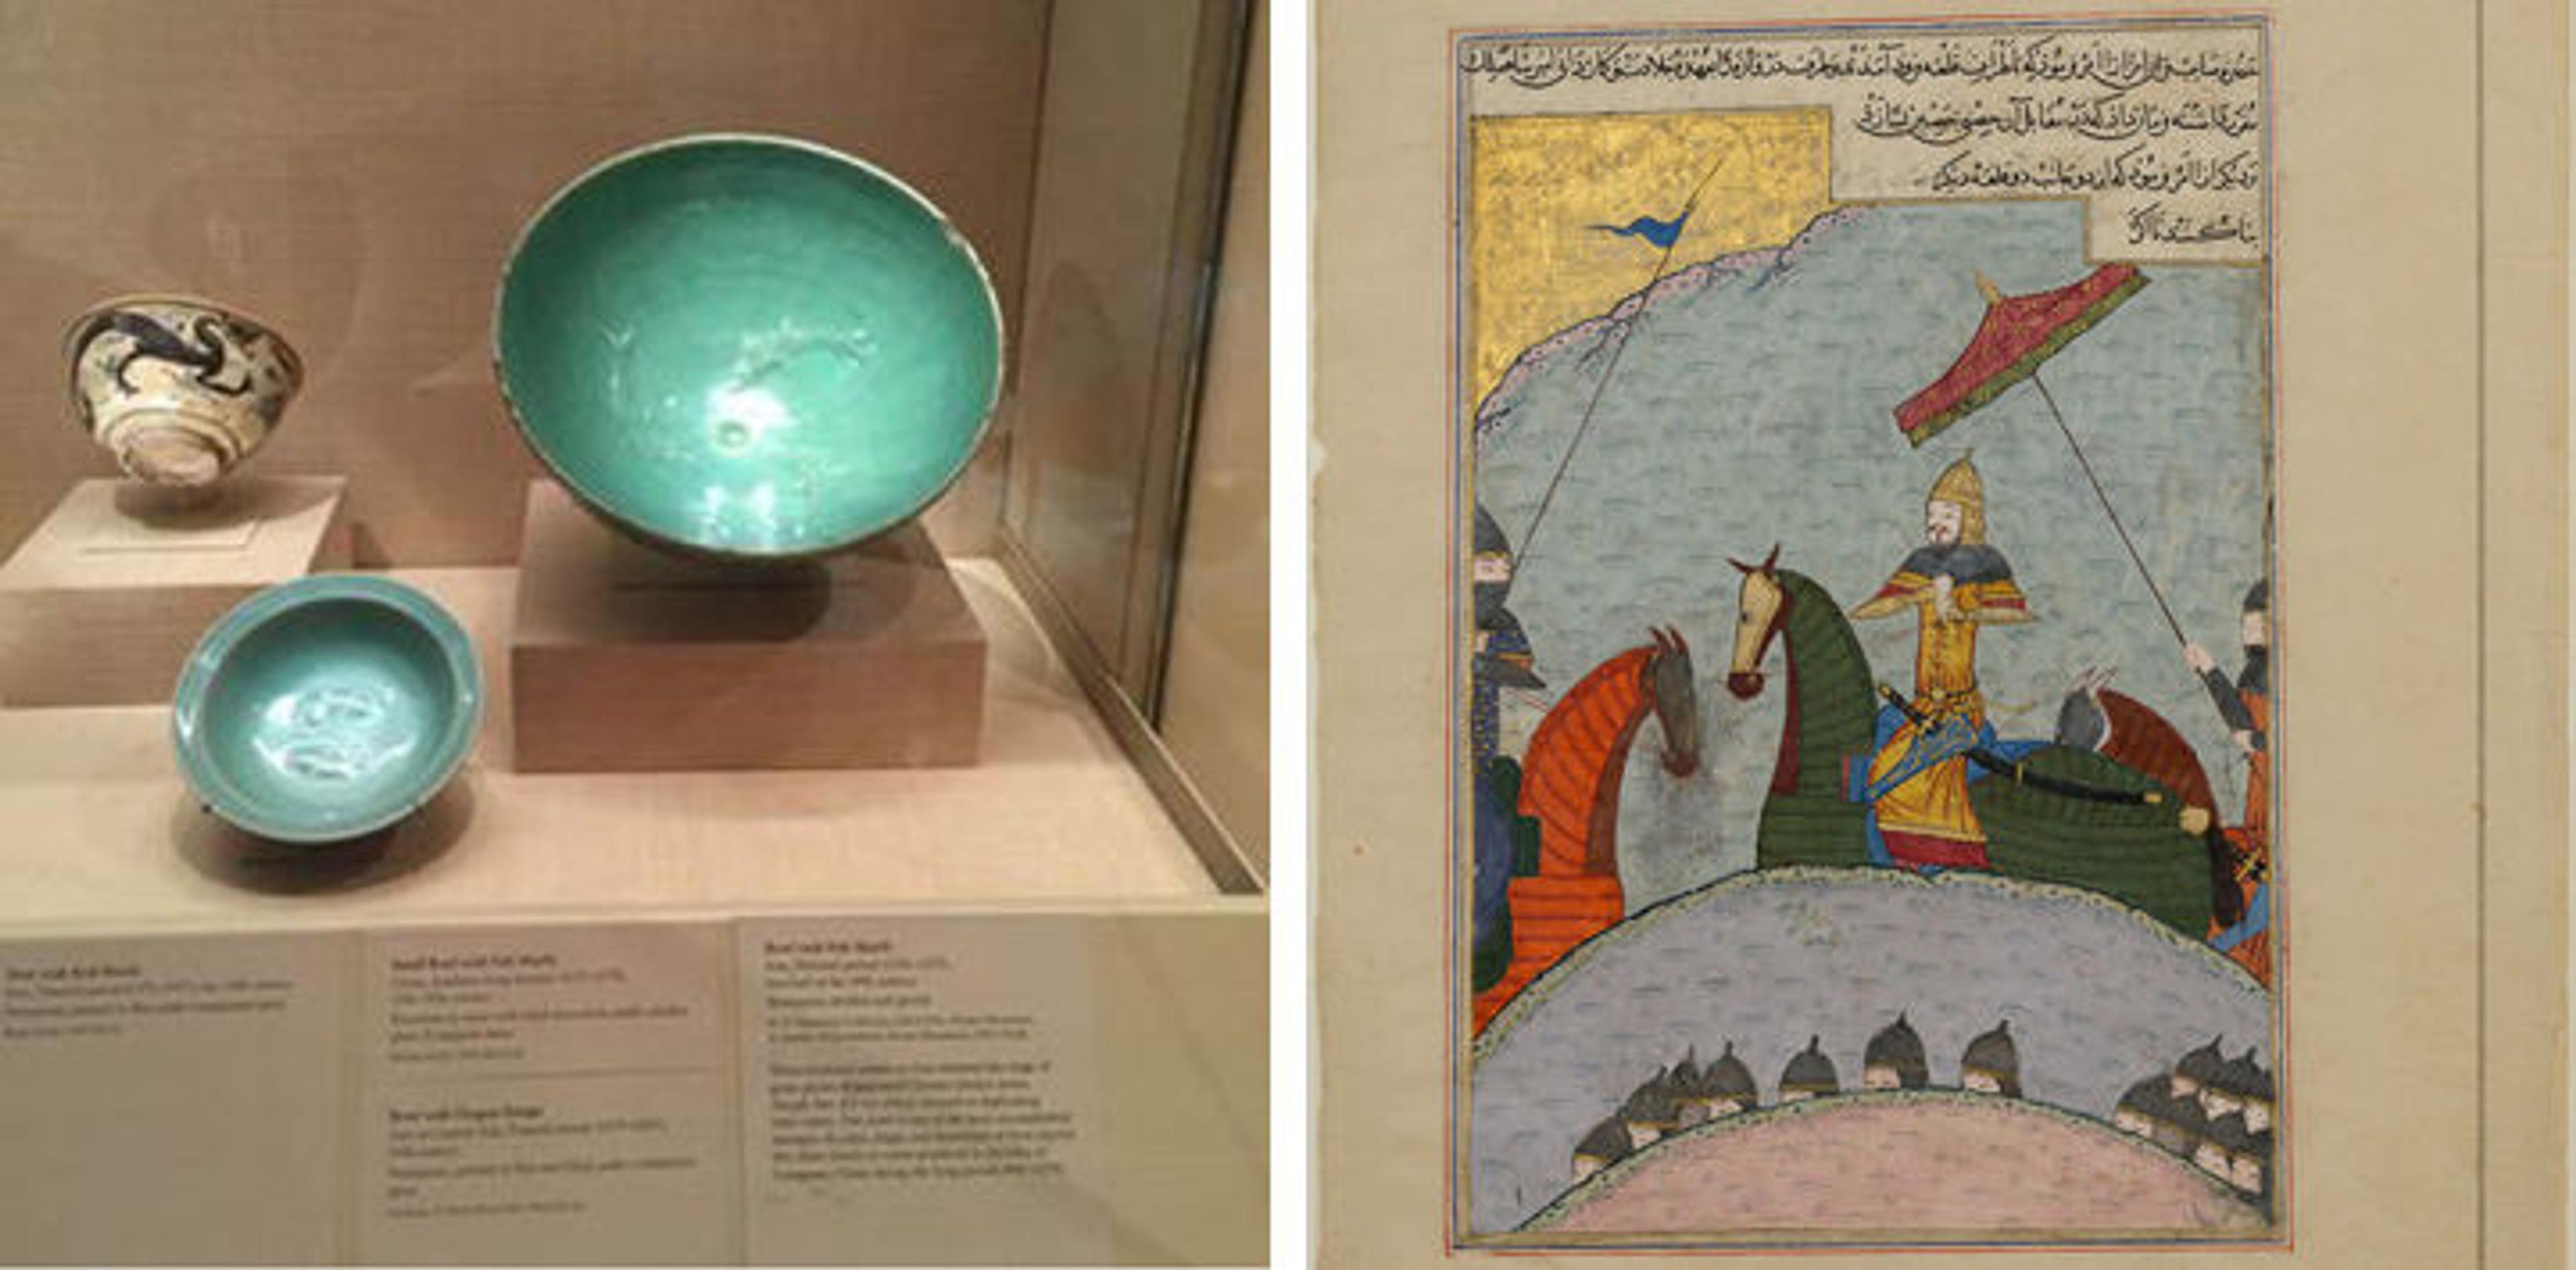 Display case with bowls from Central Asia and Iran; illuminated manuscript page